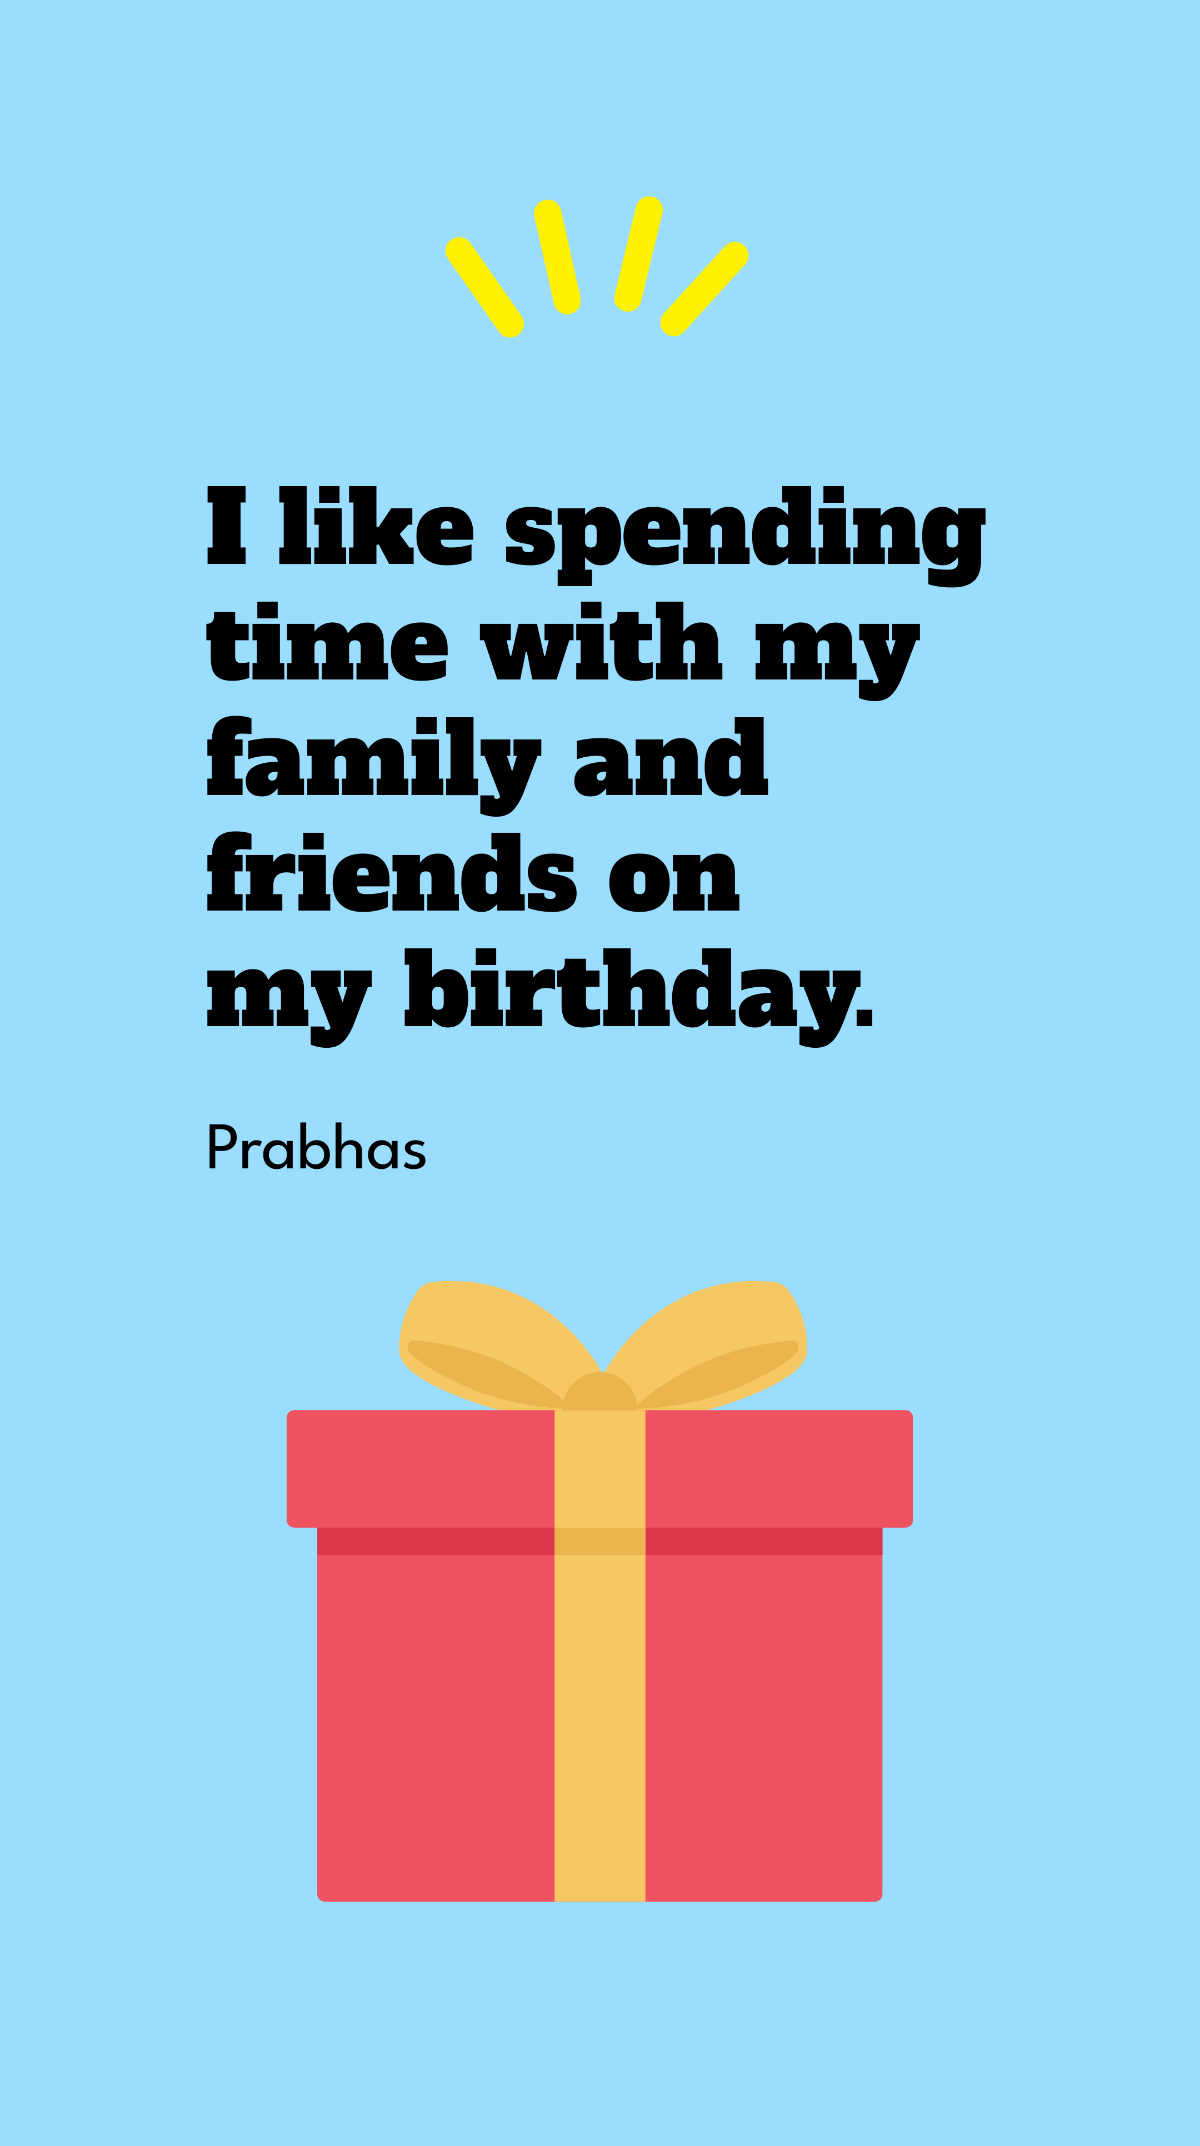 Prabhas - I like spending time with my family and friends on my birthday.